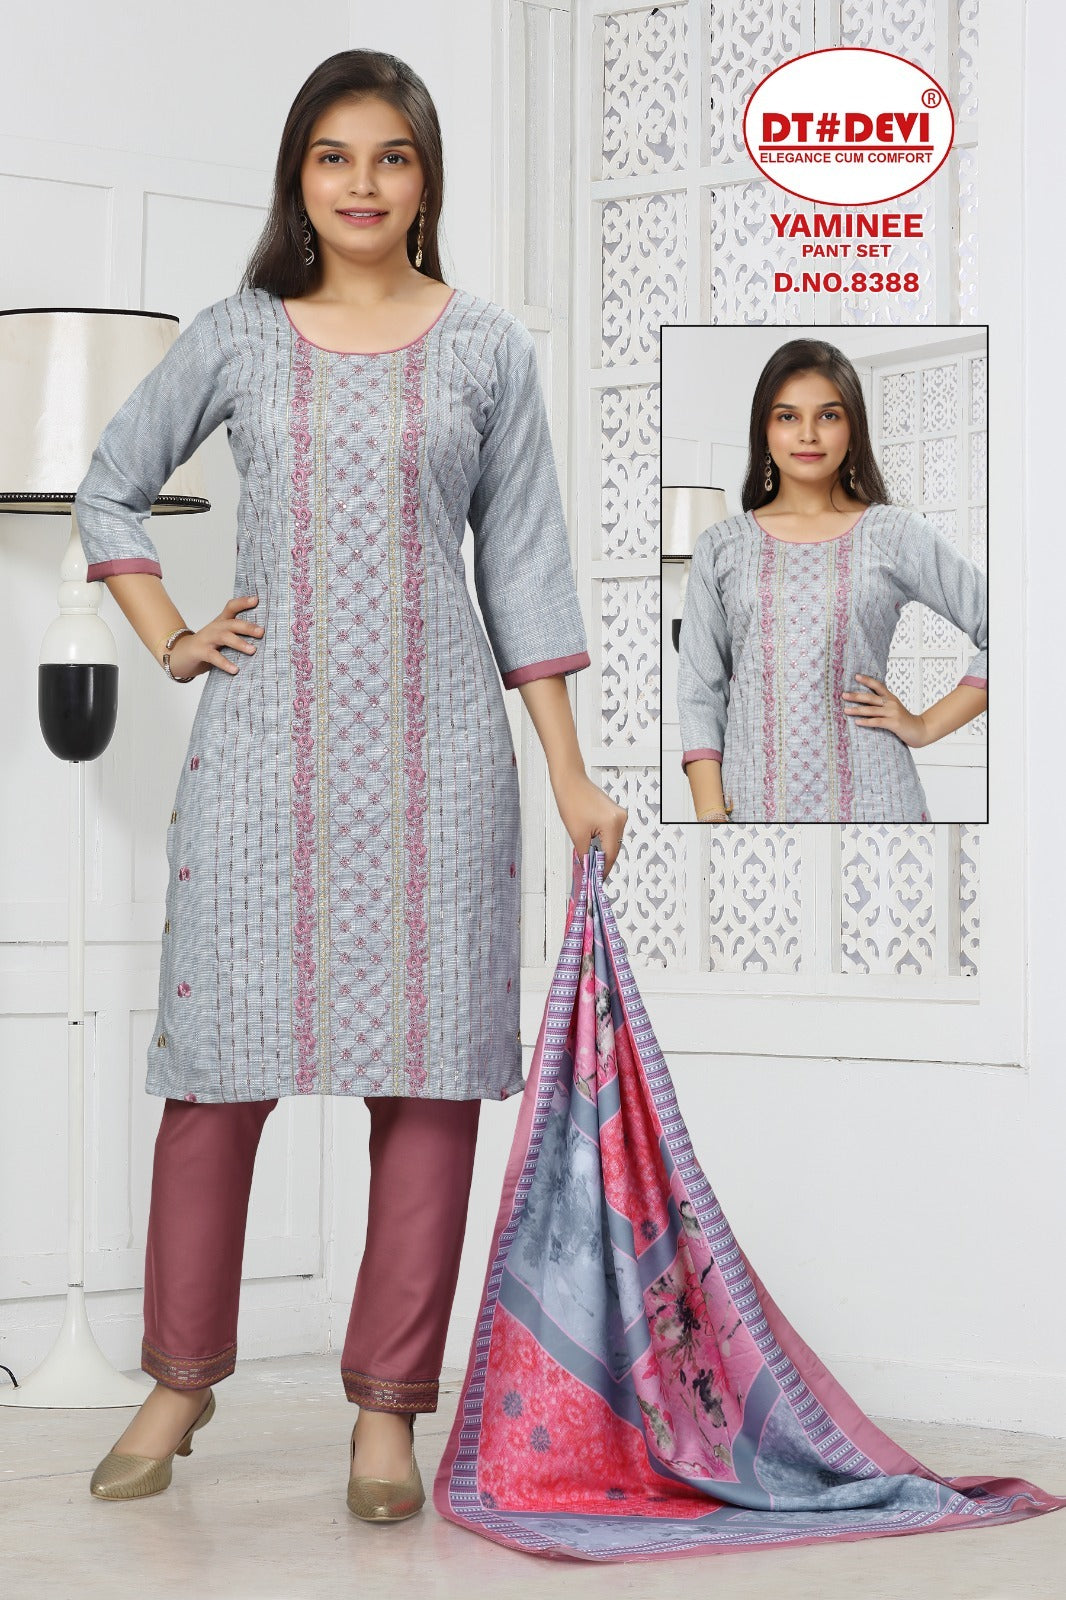 Yaminee-8388 Dt Devi Cotton Girls Readymade Pant Suits